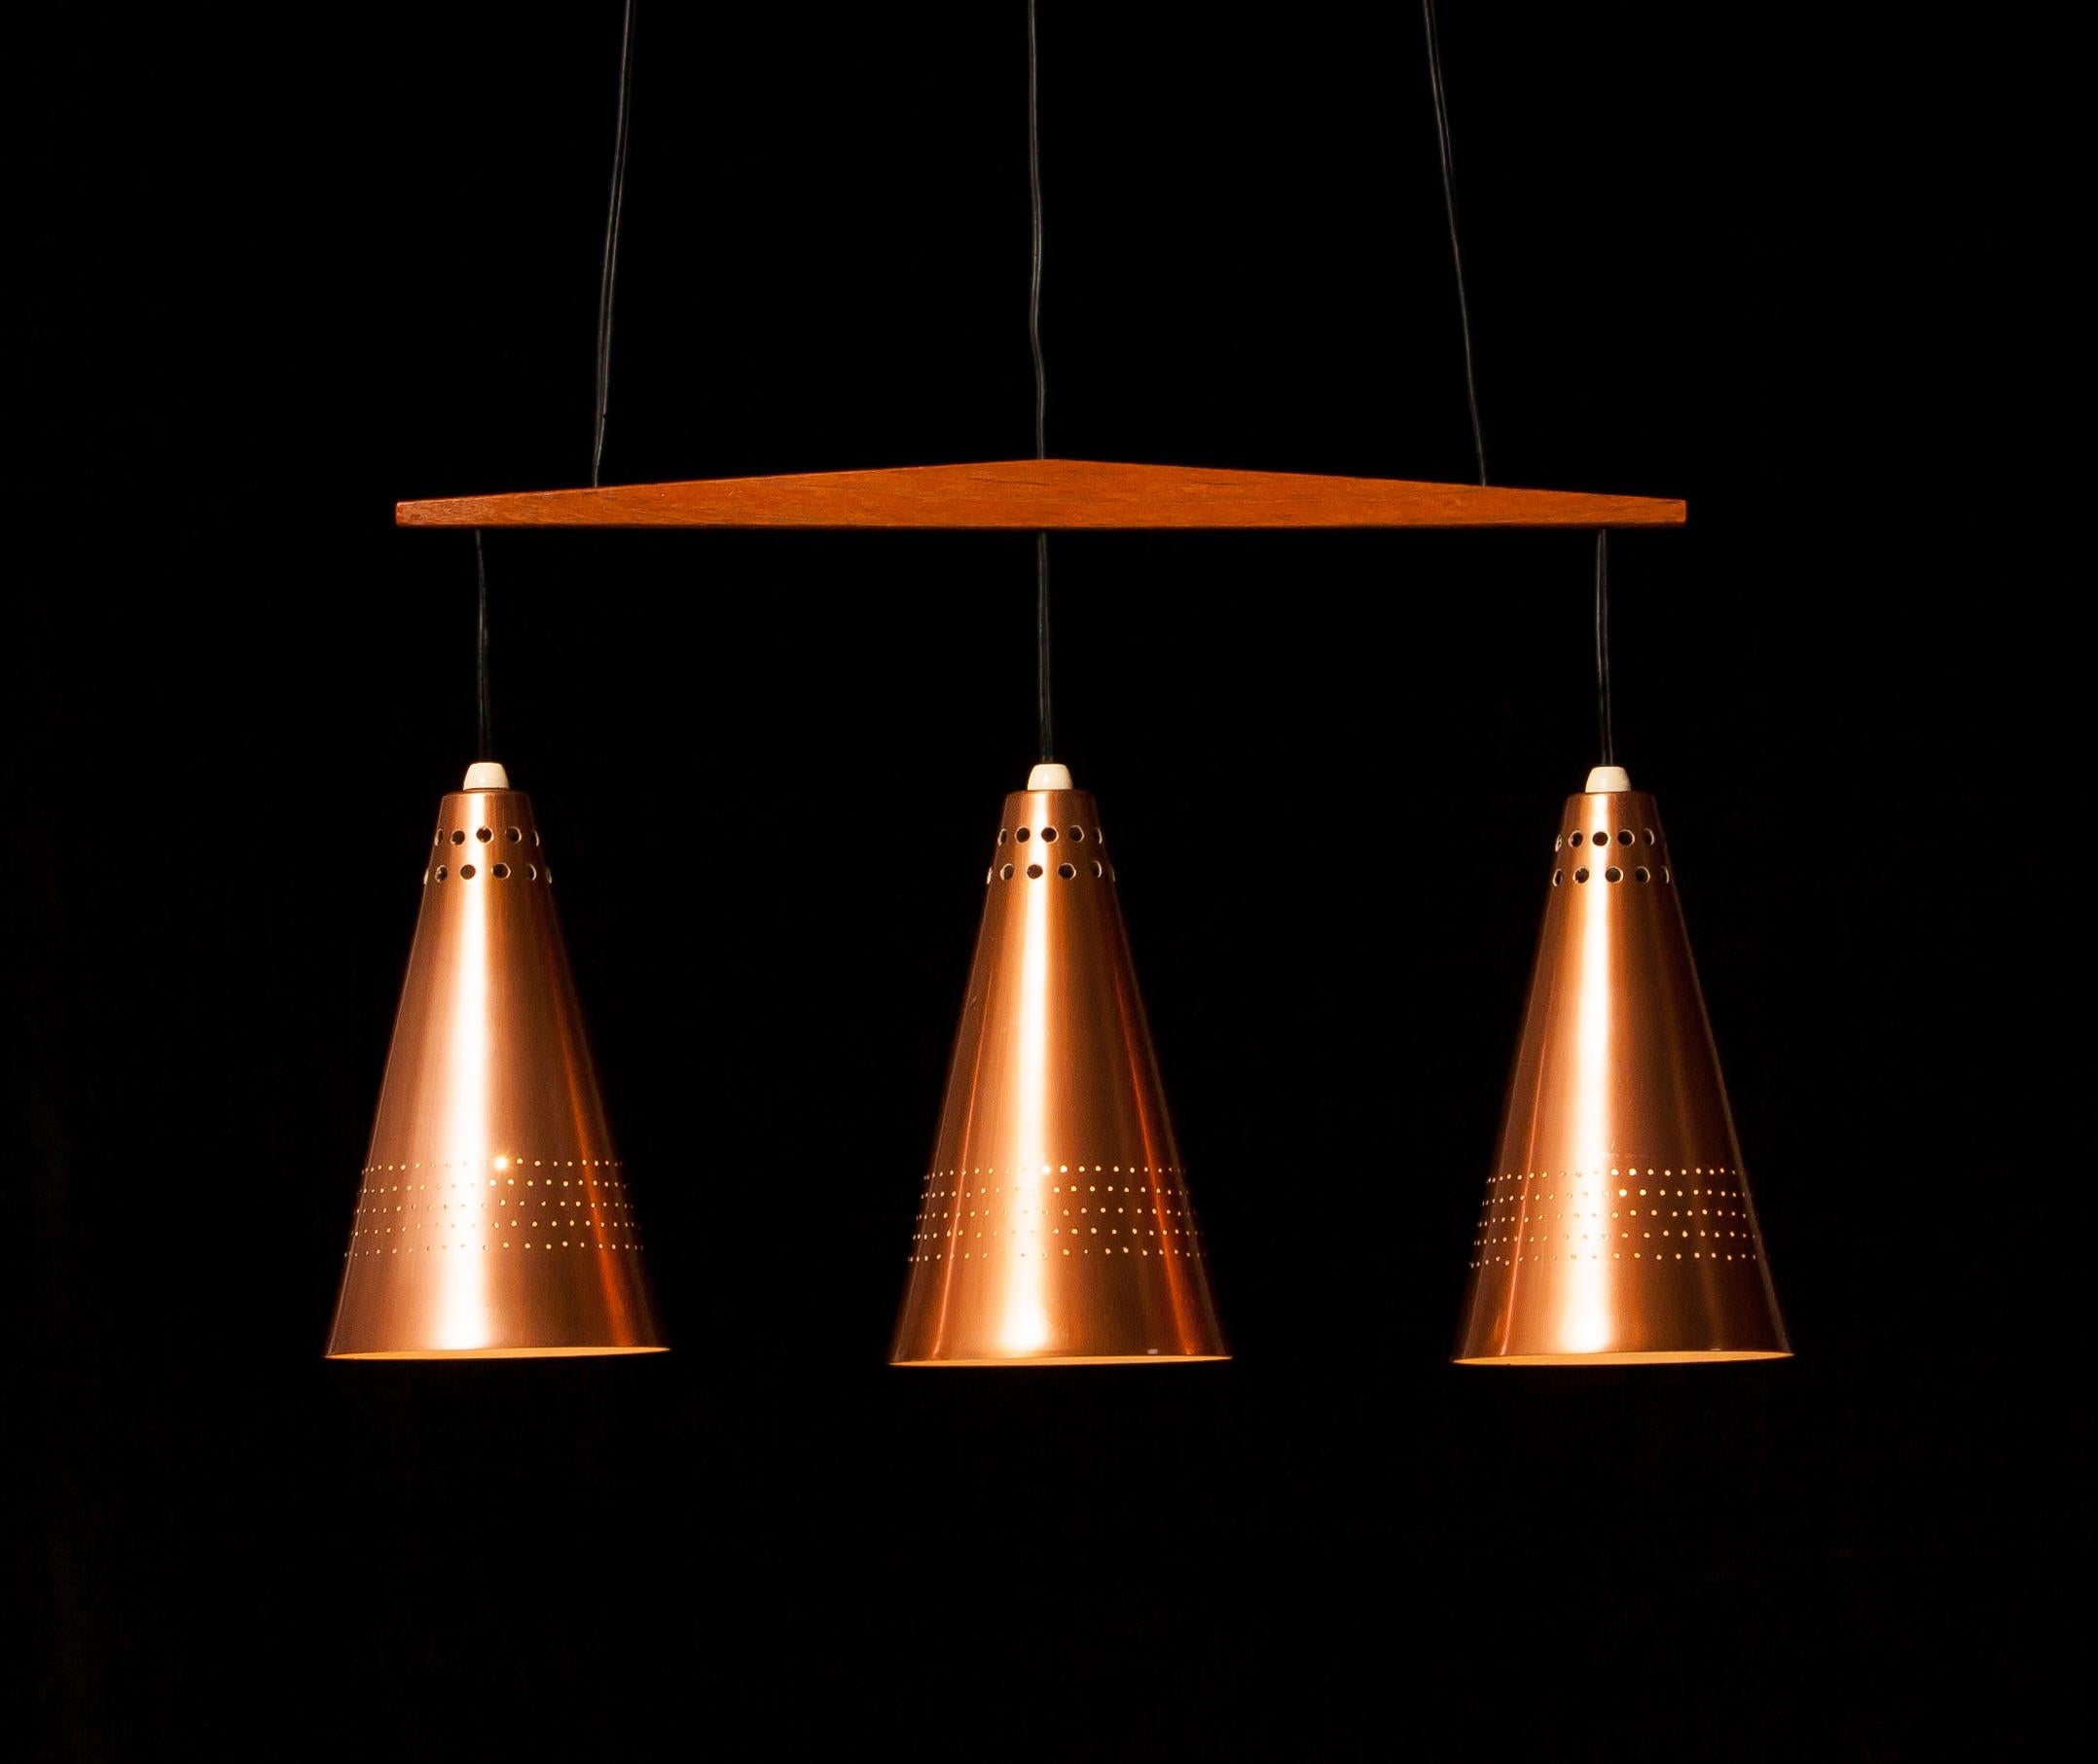 Beautiful lamp designed by Hans-Agne Jakobsson, Sweden.
This pendant is made of three perforated copper shades with a teak stretcher.
It is adjustable in height.
The lamp is in a very nice condition.
Period 1950s
Dimensions: H 130 cm, W 58 cm,